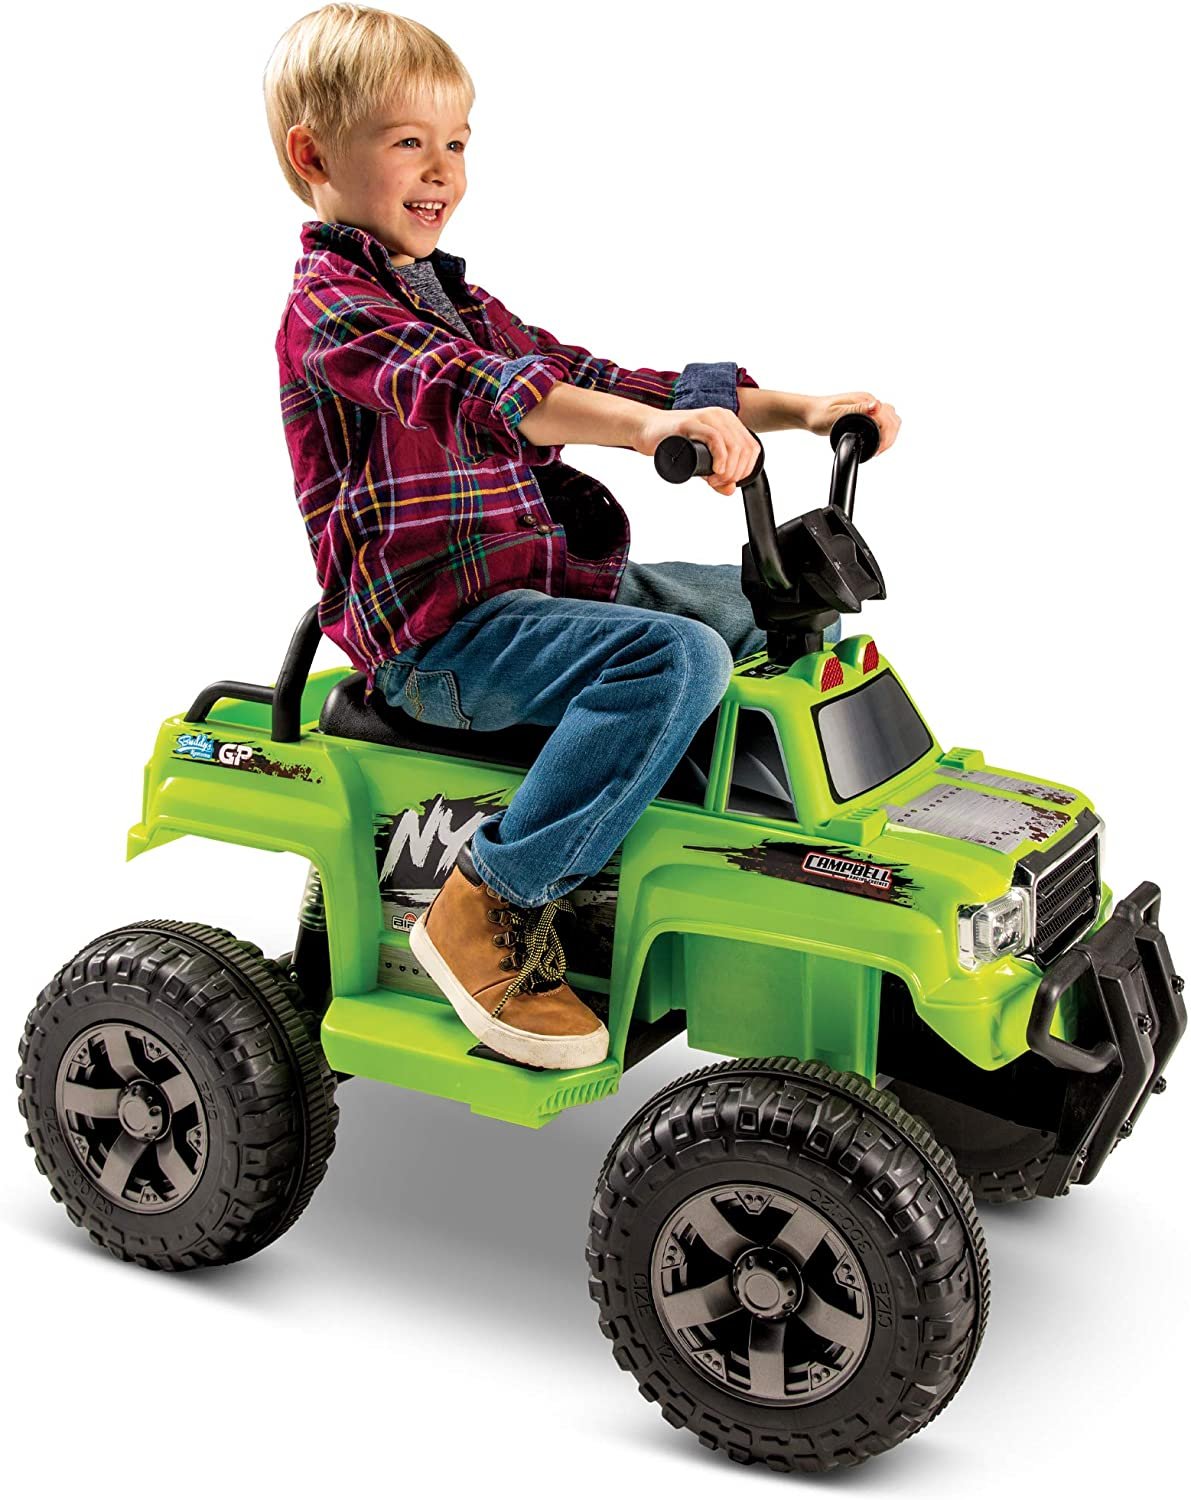 8. Huffy Electric Ride On Cars for Kids Green